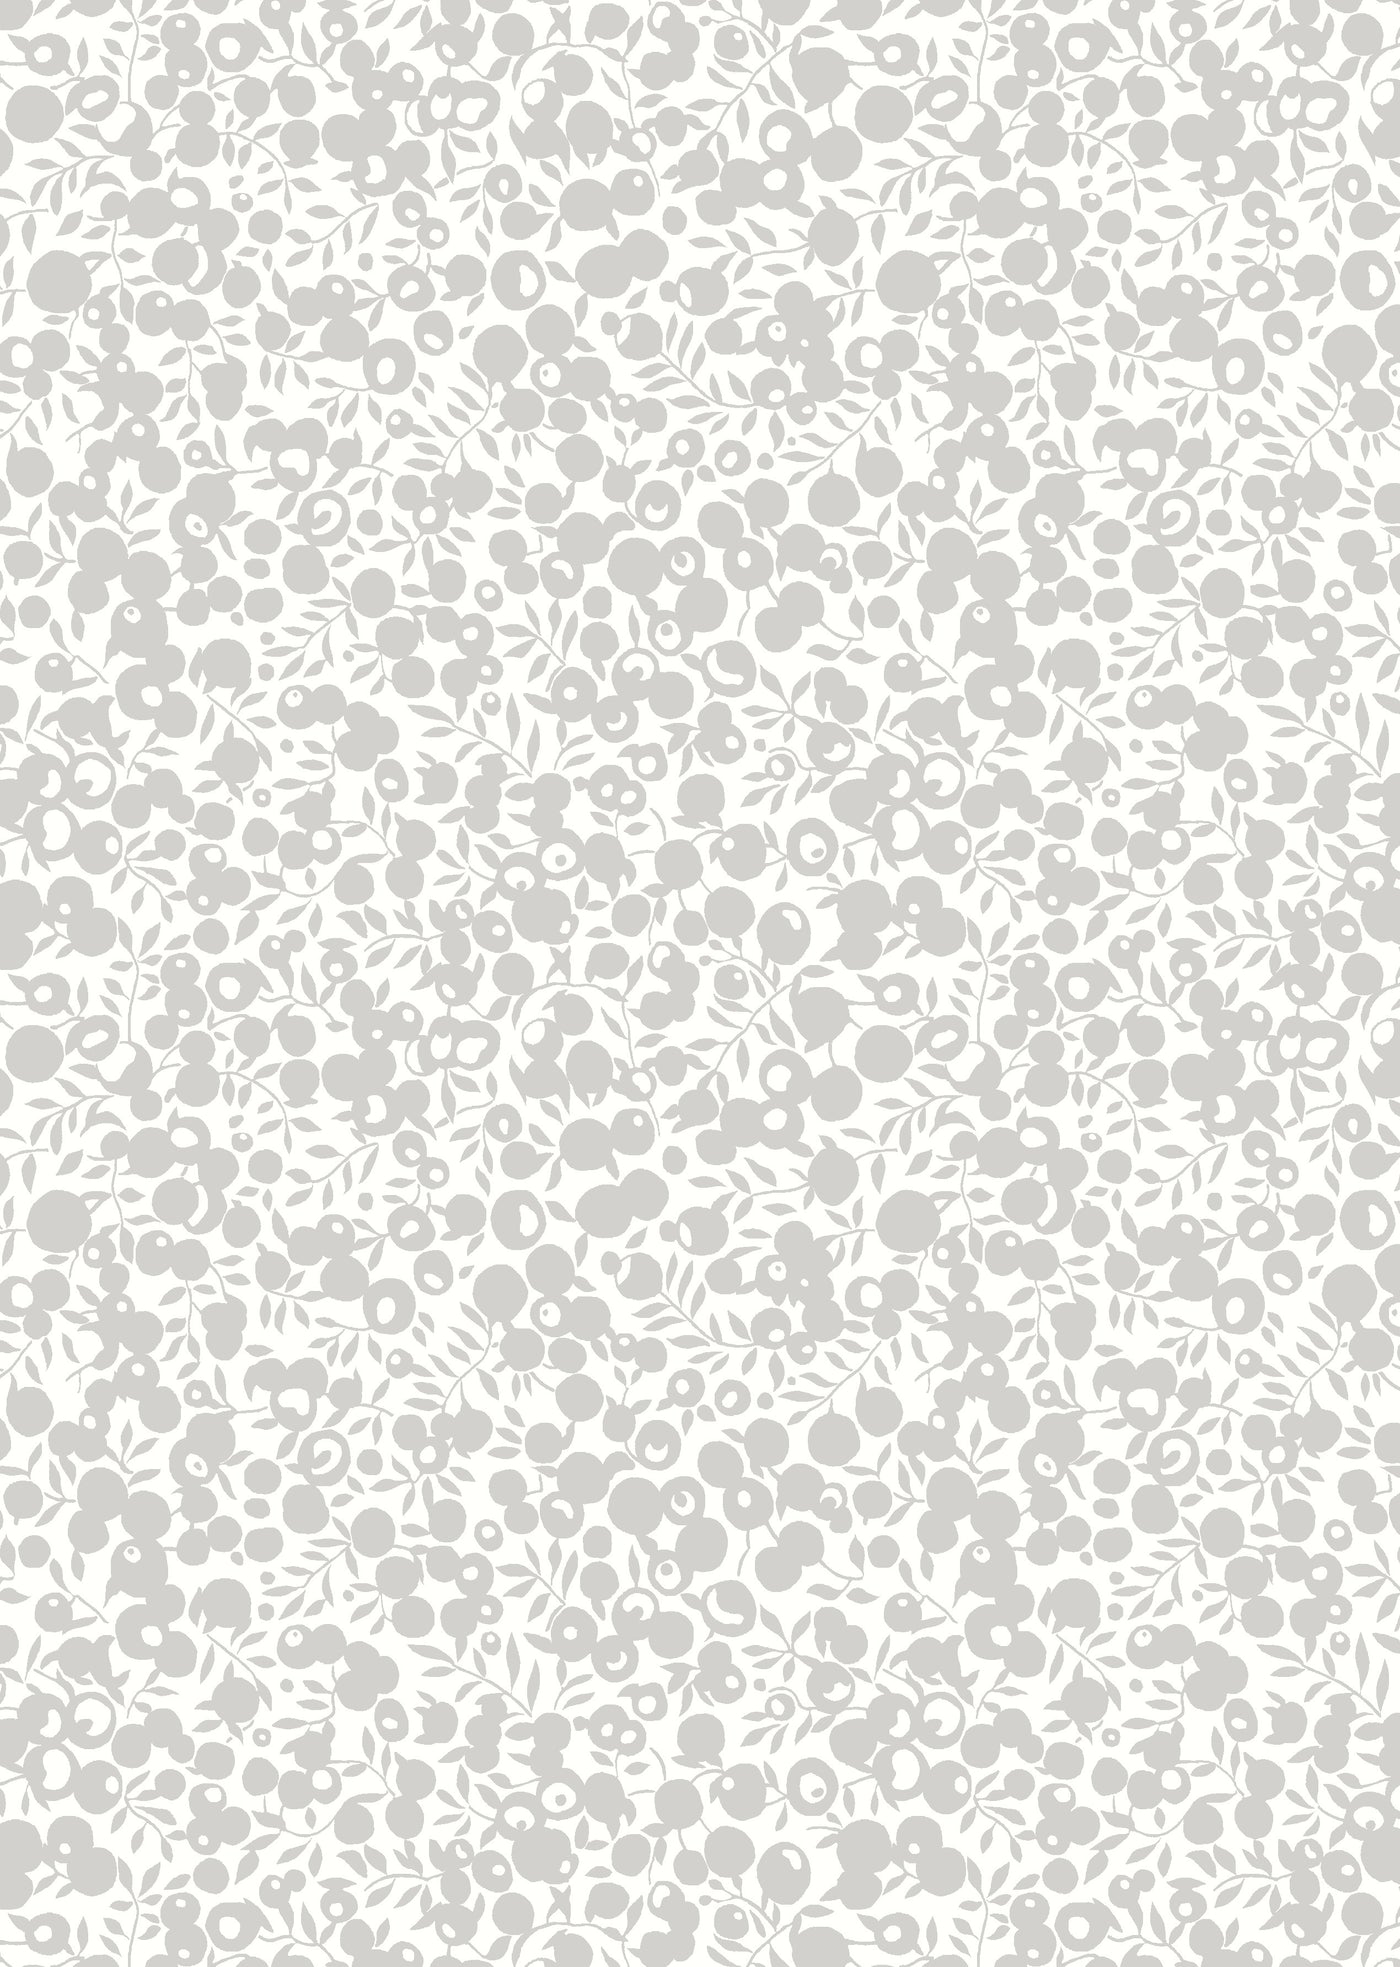 Wiltshire Silver cotton fabric from the merry and bright collection and A woodland Christmas by Liberty of London